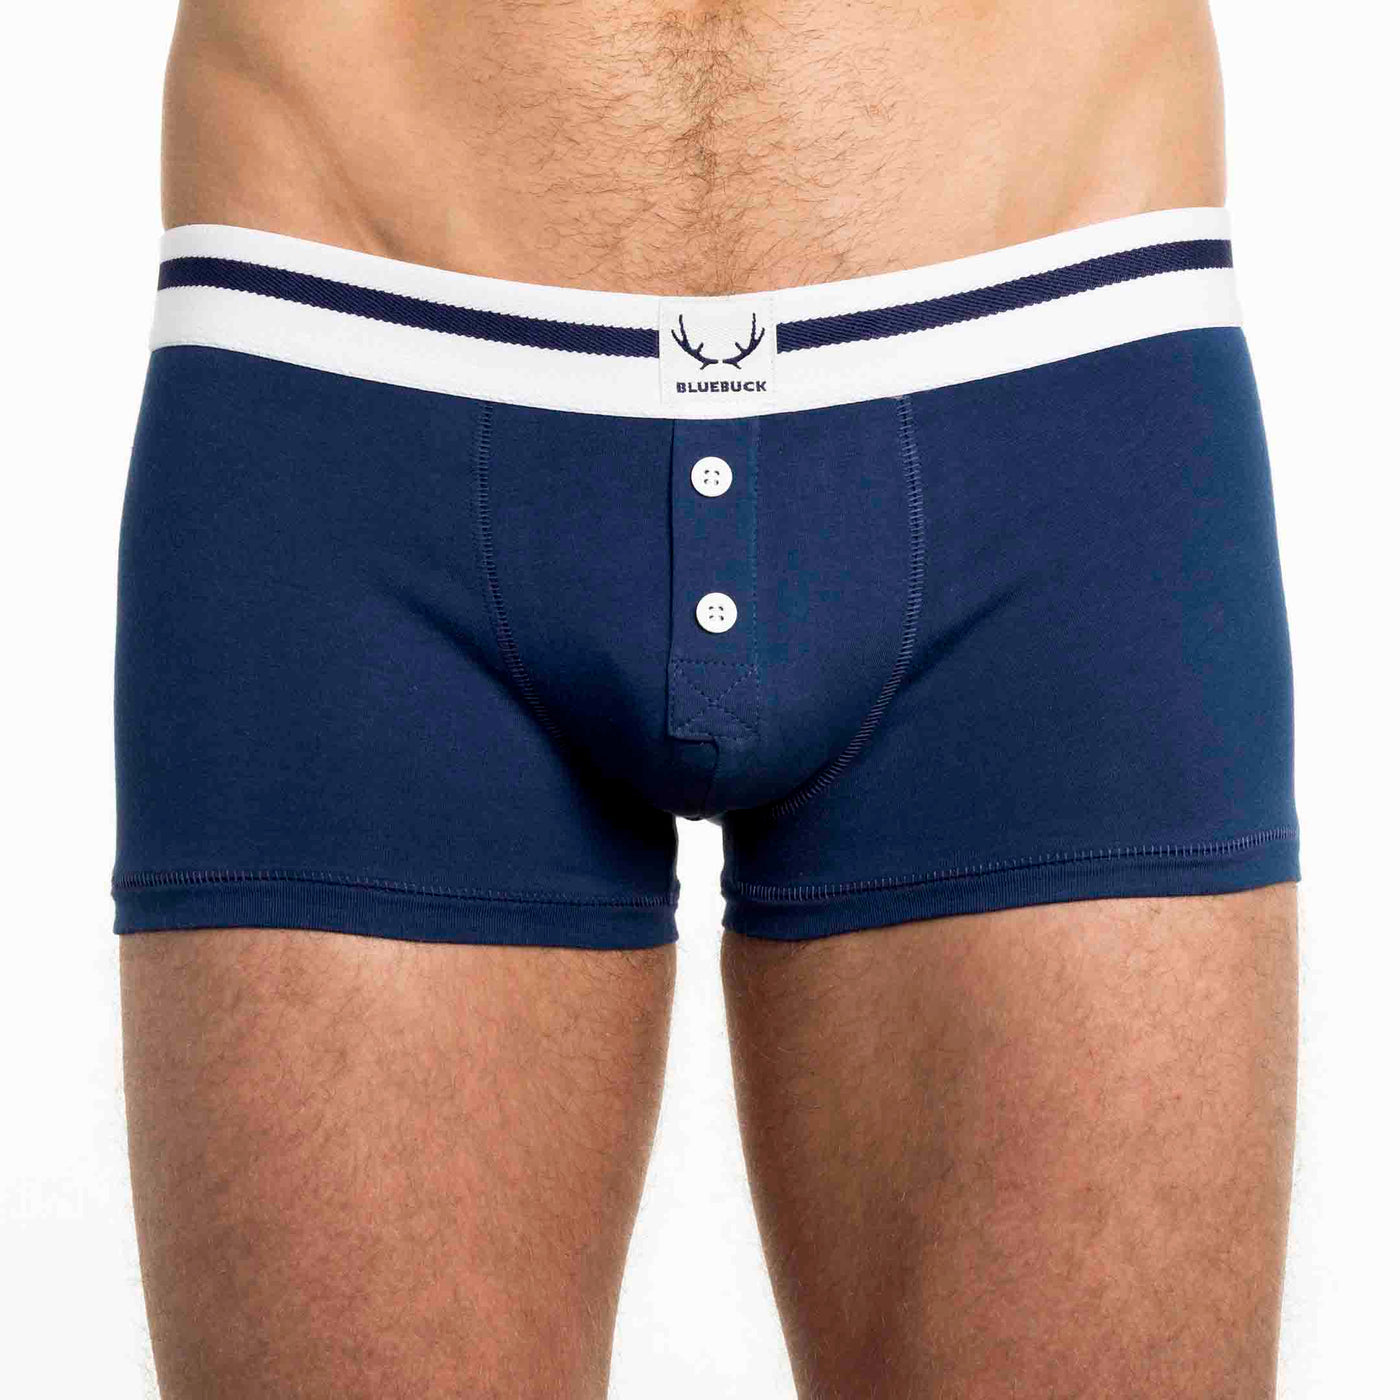 Navy blue organic cotton men's trunks with white buttons